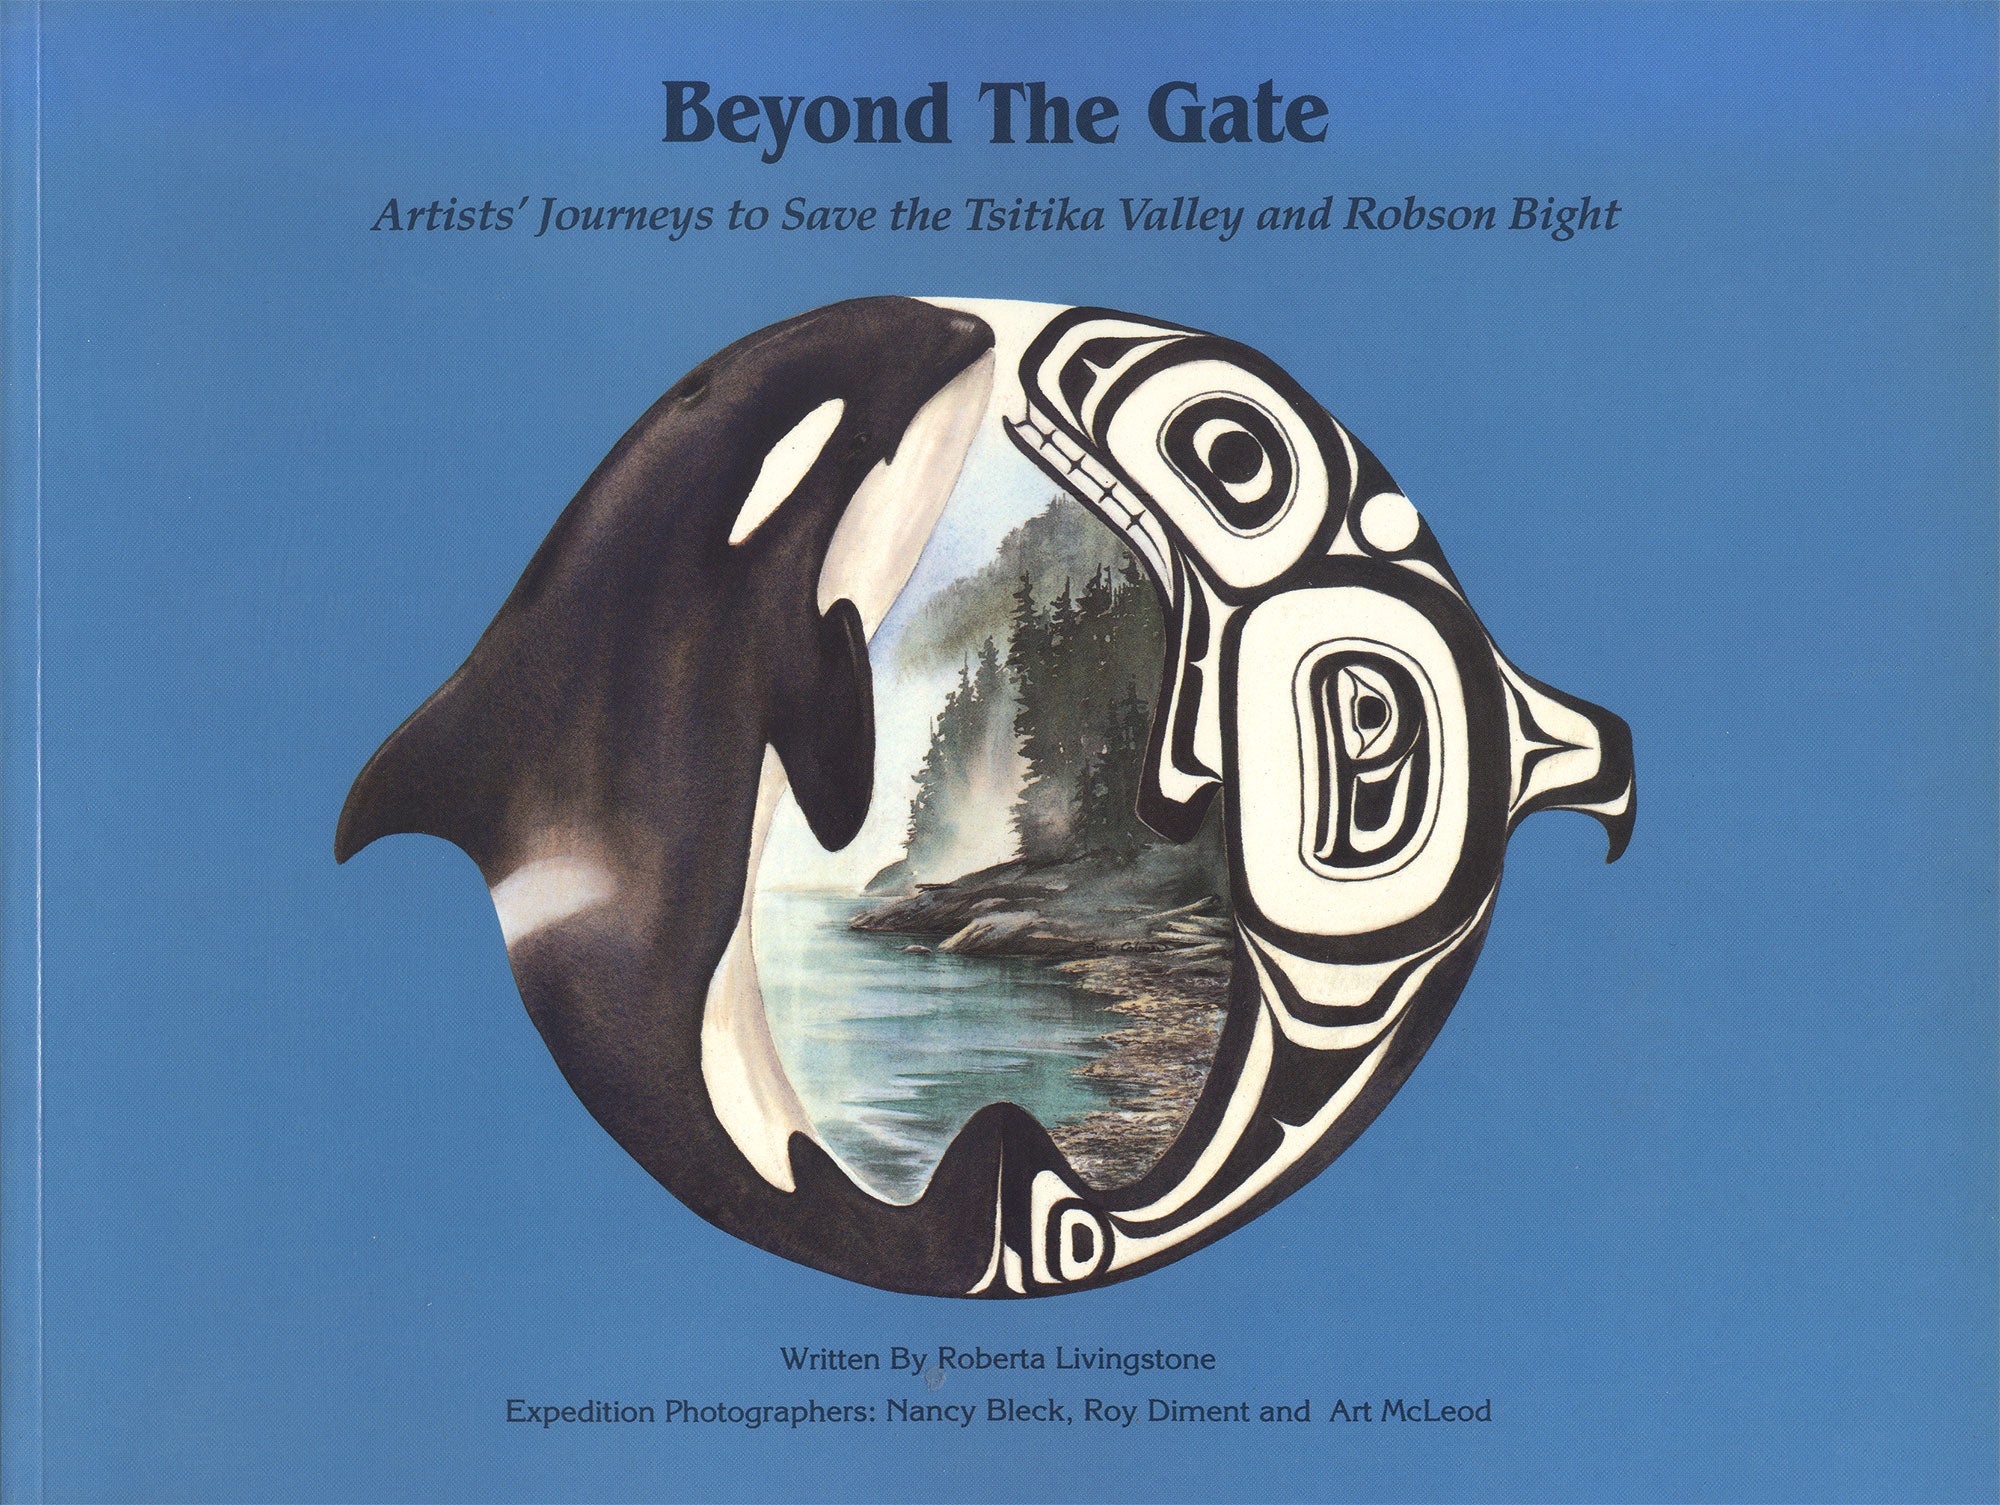 A book. The cover illustrates two orcas facing each other - one drawn in realistic style and one done in Coast Salish style. The text on the cover reads "Beyond the Gate: Artists' Journeys to Save the Tsitika Valley and Robson Bight." End of image description.